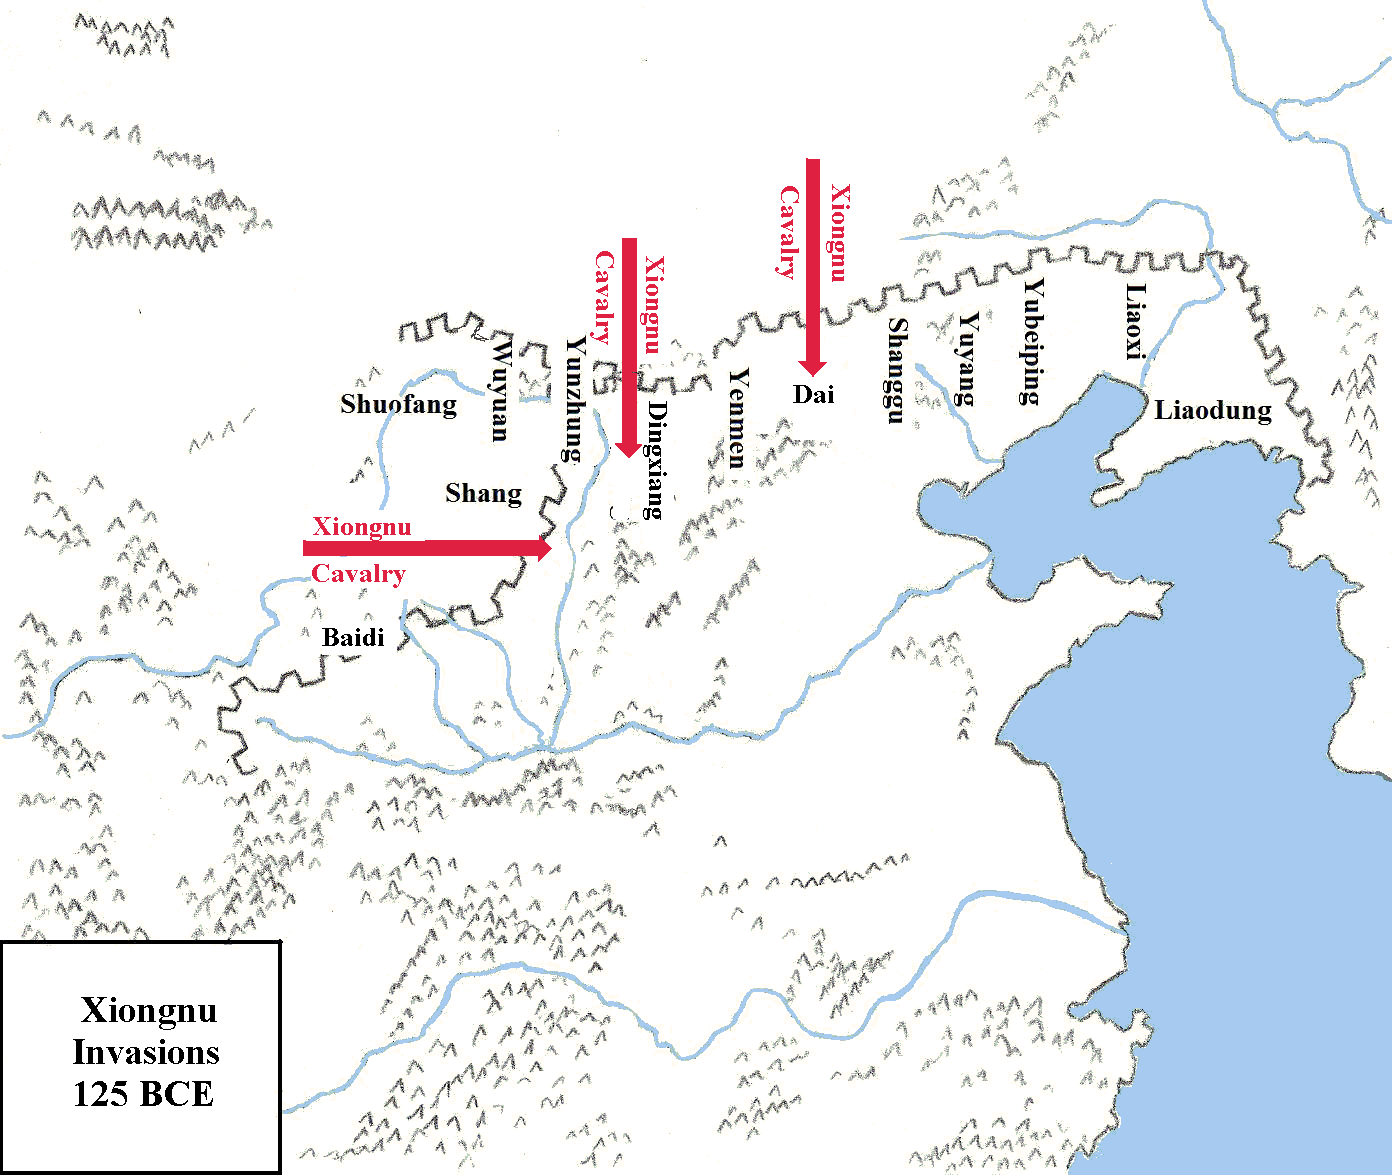 Map of Xiongnu invasions in 125 BCE